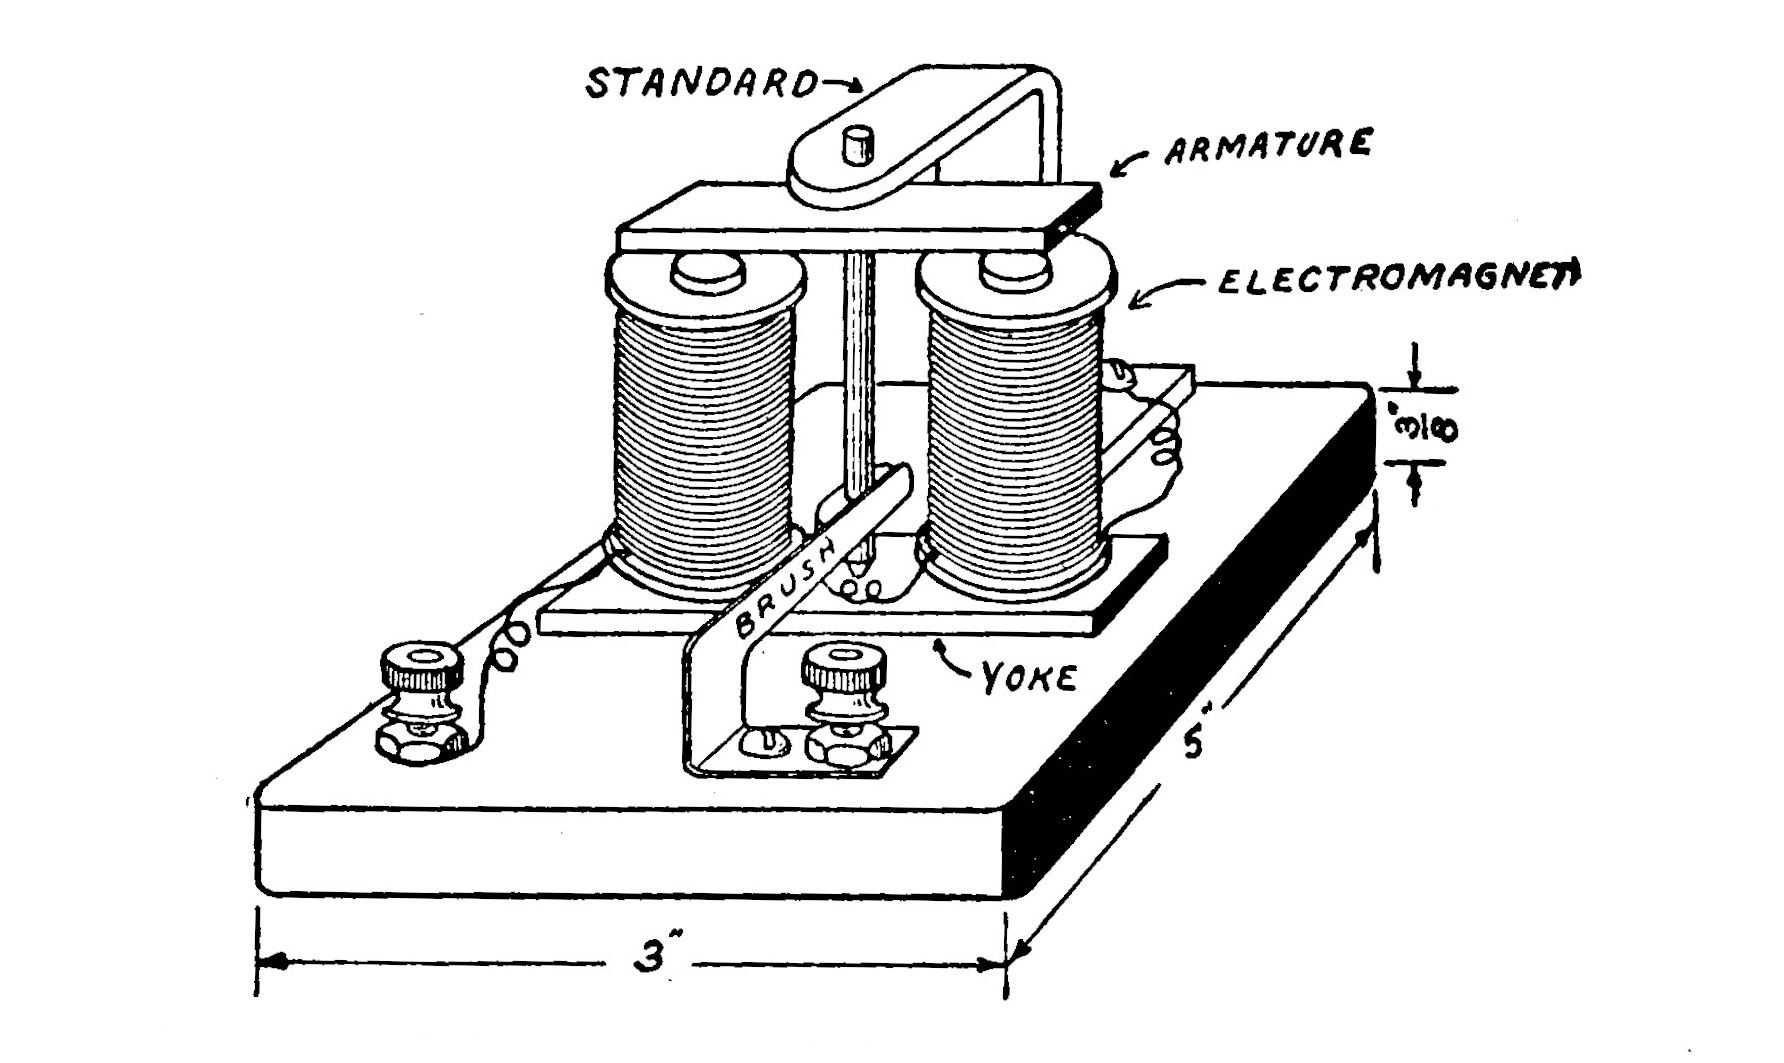 FIG. 39.—The completed Magnetic Attraction Motor.